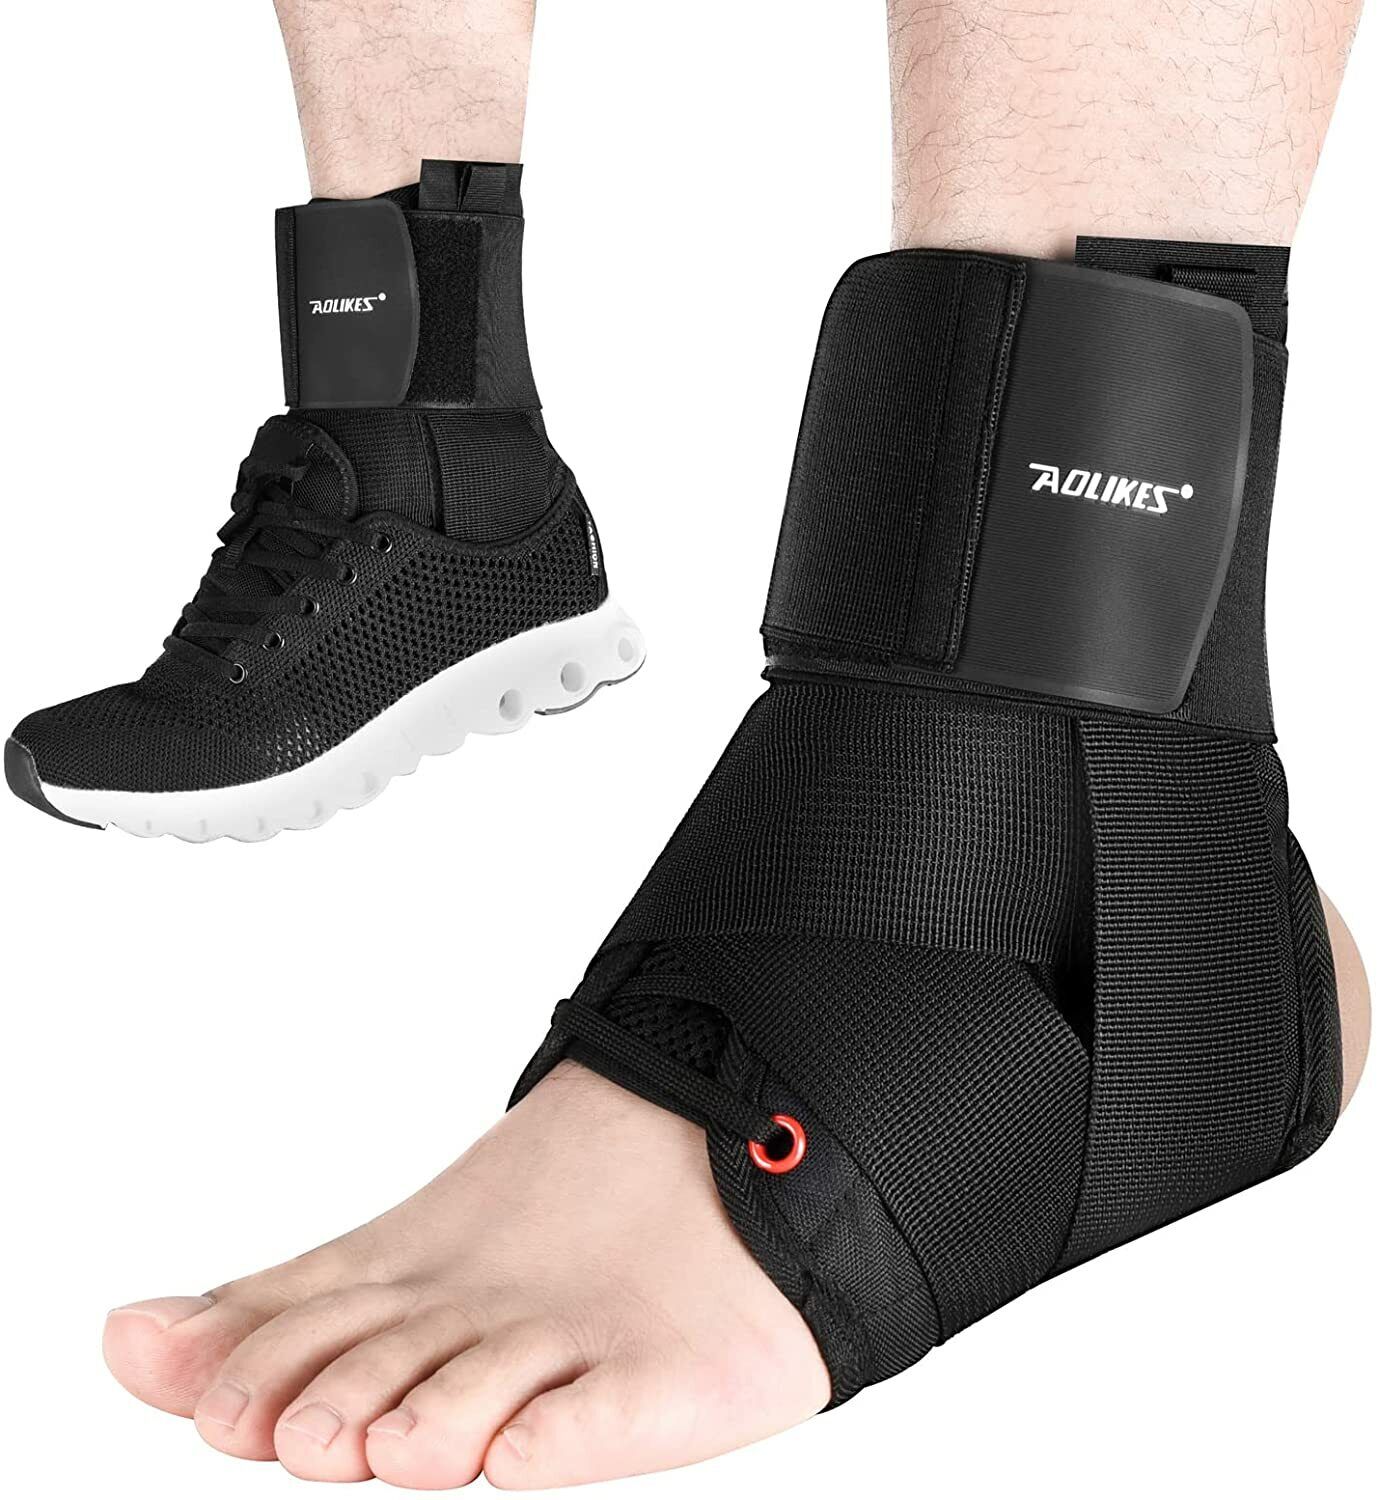 Large L  Ankle Brace for Women Men 2022 Comfortable] [Supportive] Lace Up Ankle